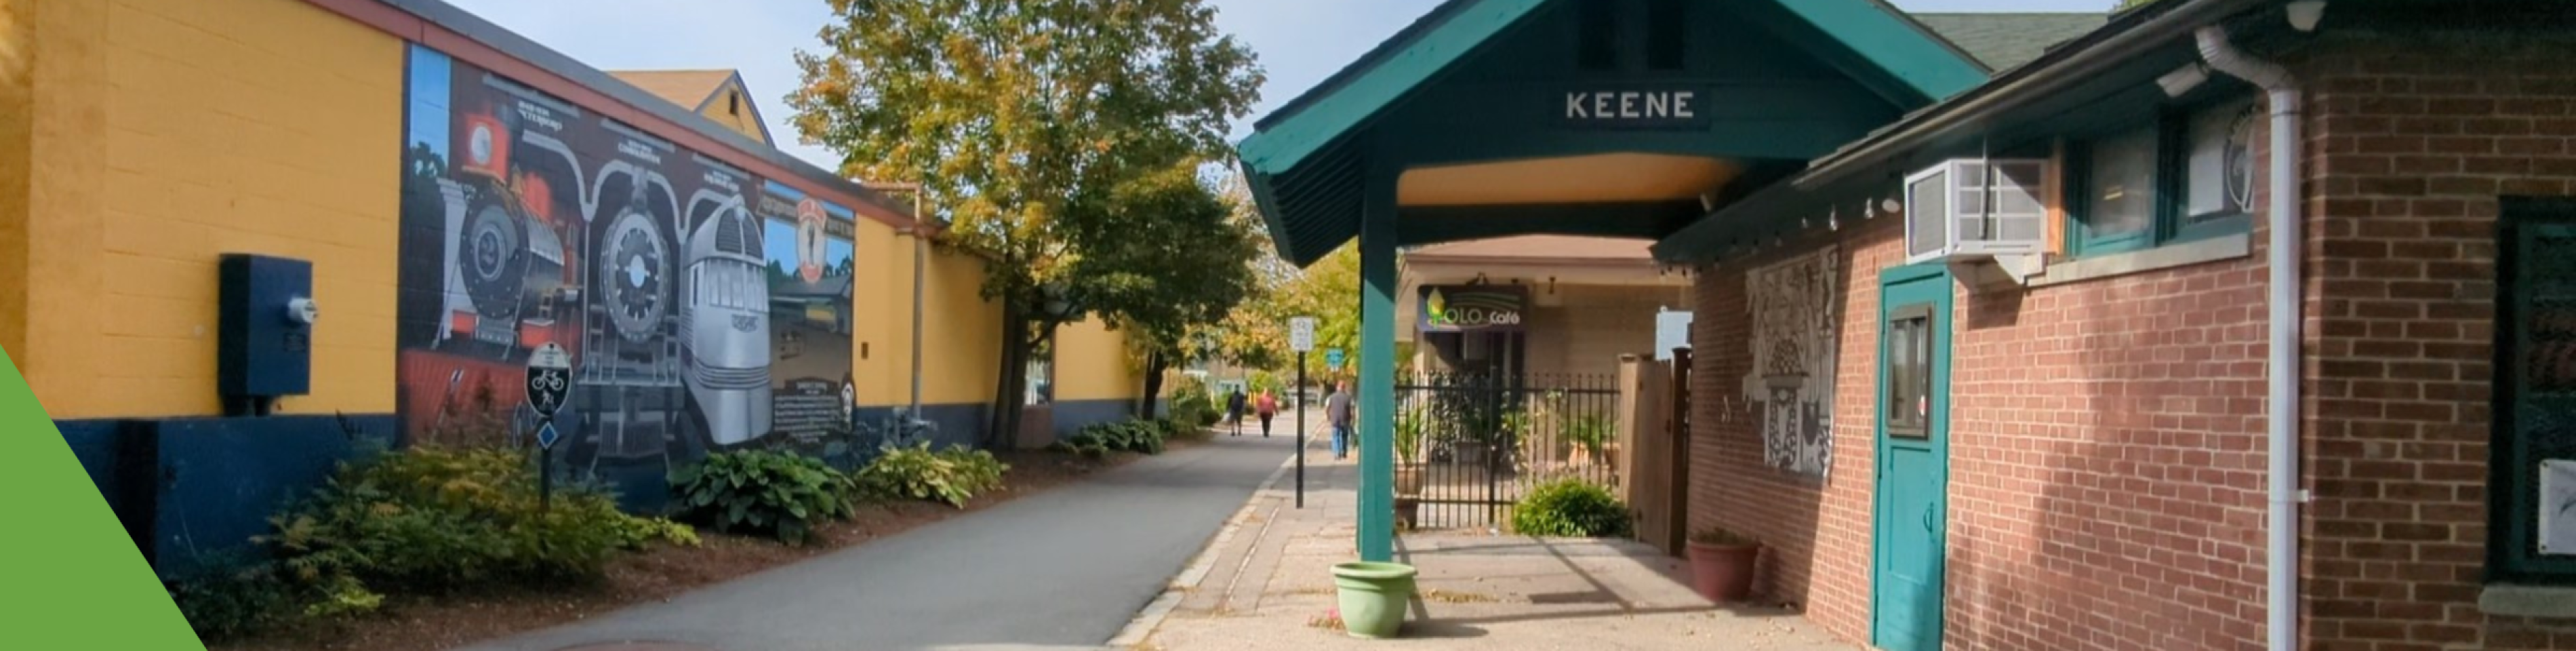 Downtown Keene Depot and Trail Photo Banner